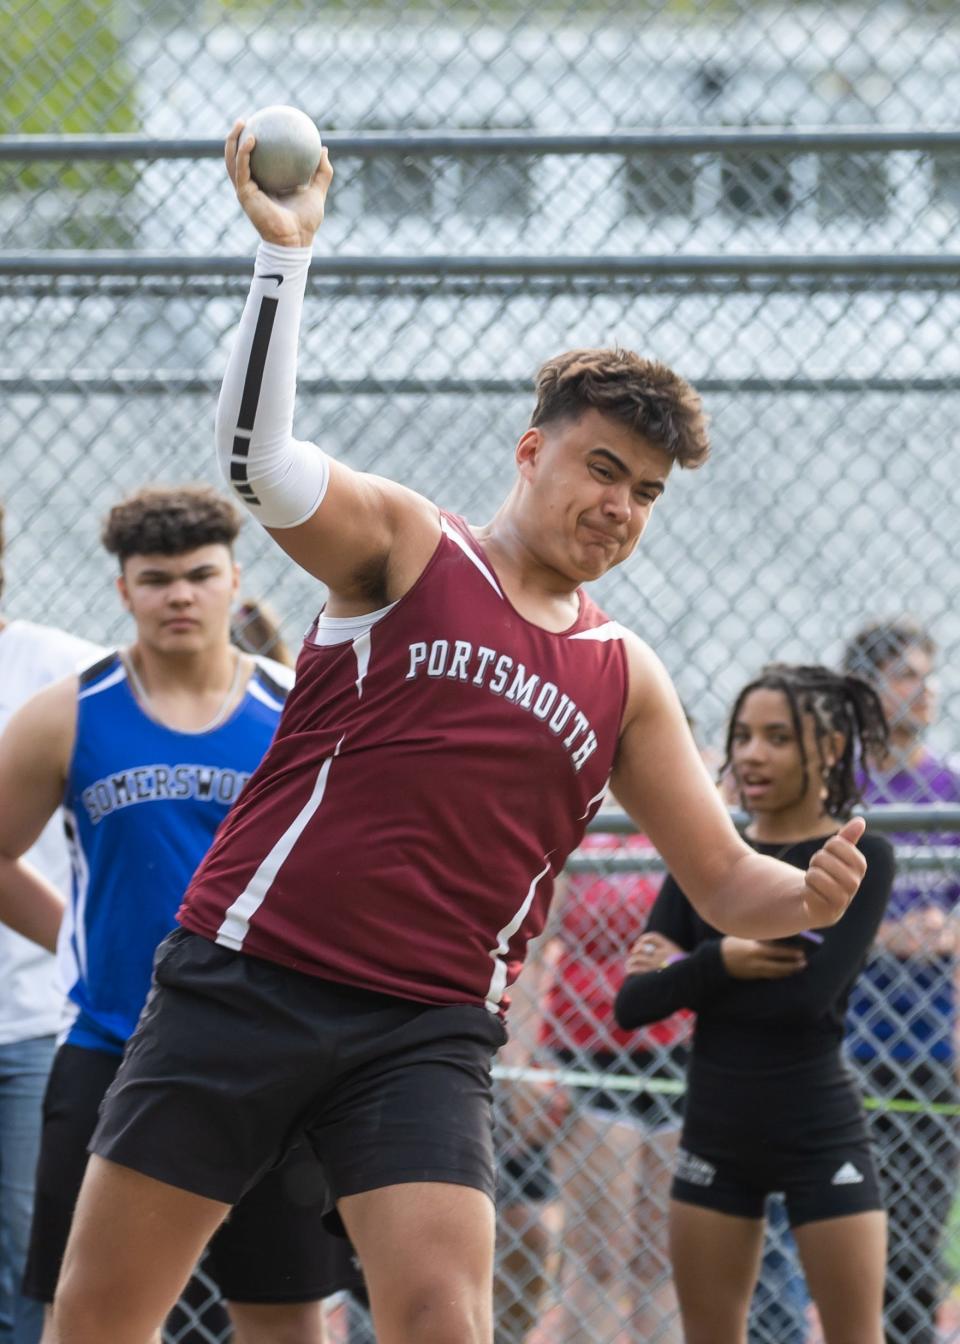 Portsmouth's Caiden Paolucci throws the shot put at Friday's Seacoast Track Championship meet at Exeter High School.